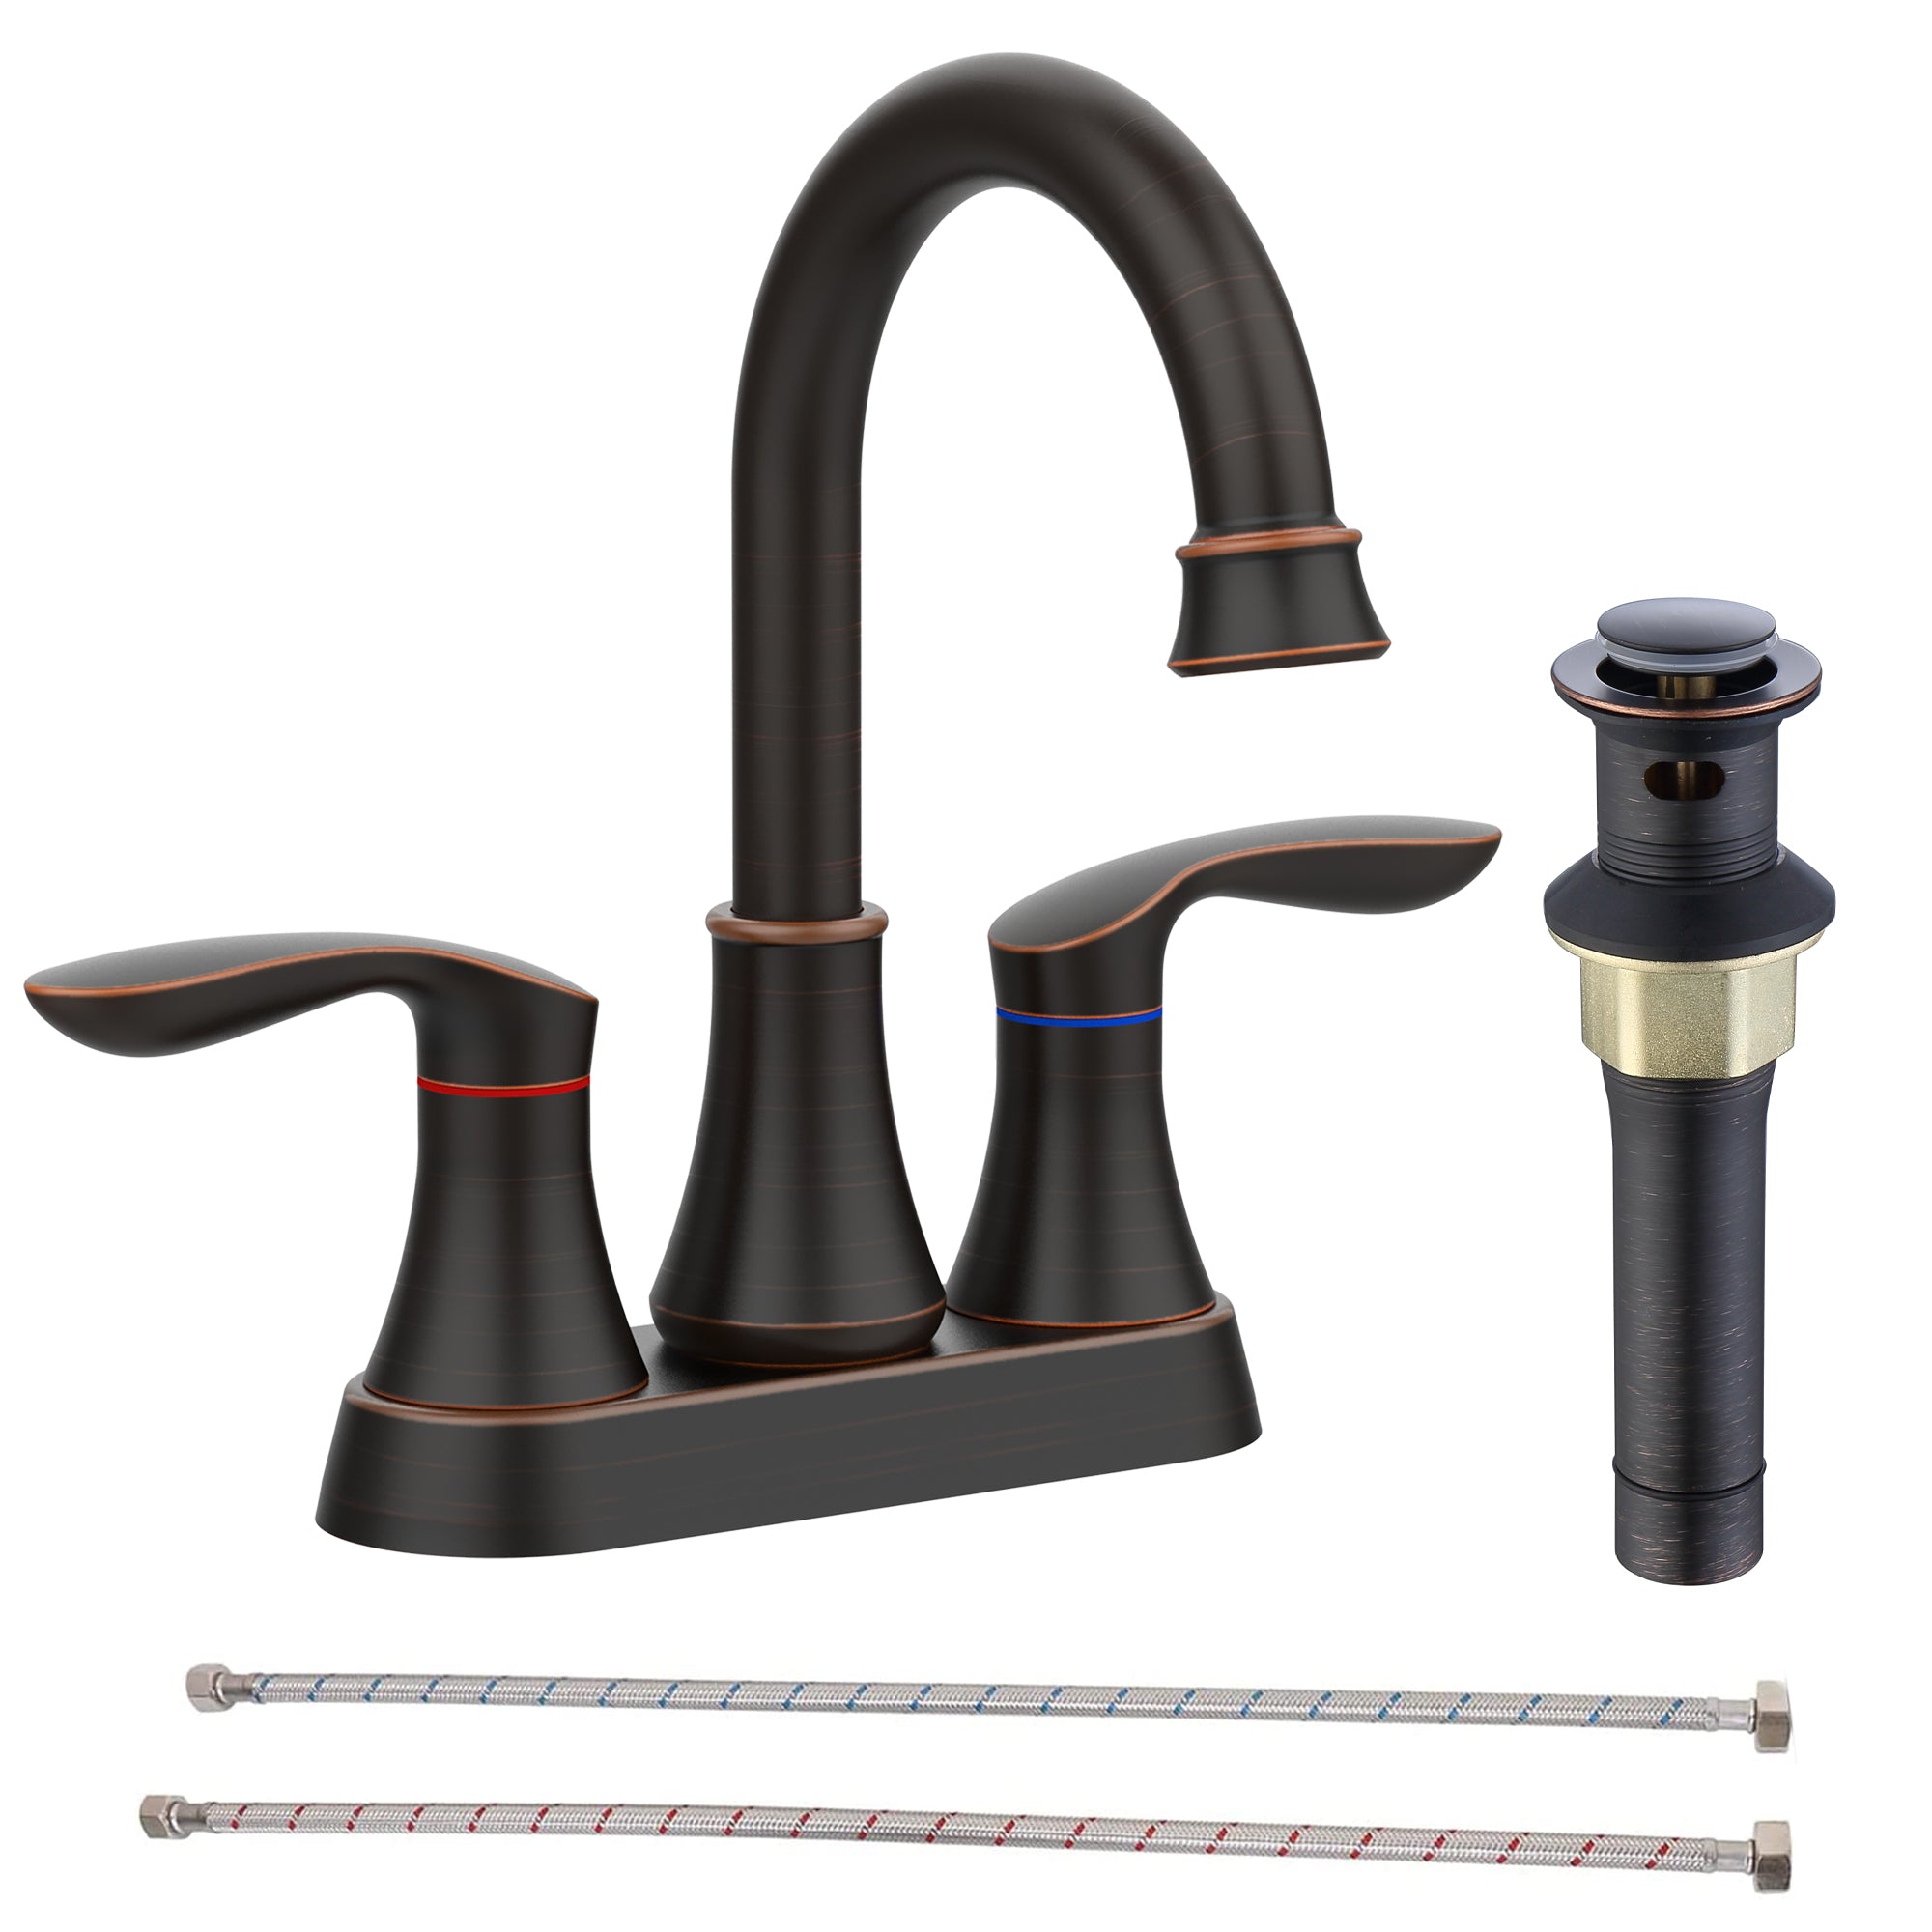 4 in. Centerset Double Handle High Arc Bathroom Faucet with Drain Kit Included